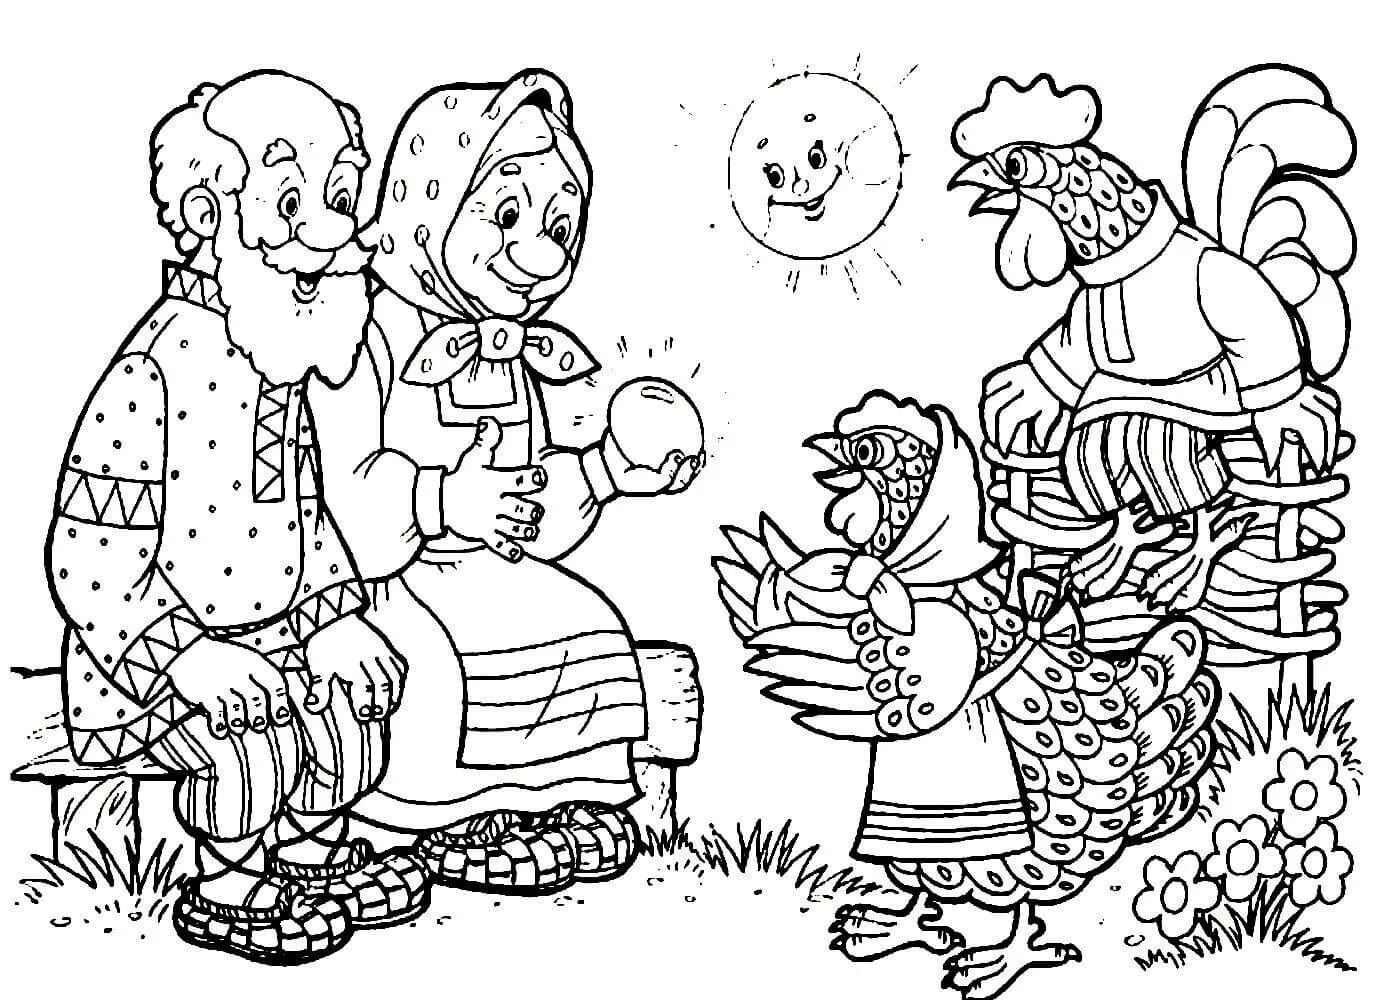 According to Russian folk tales for children 4 5 years old #4